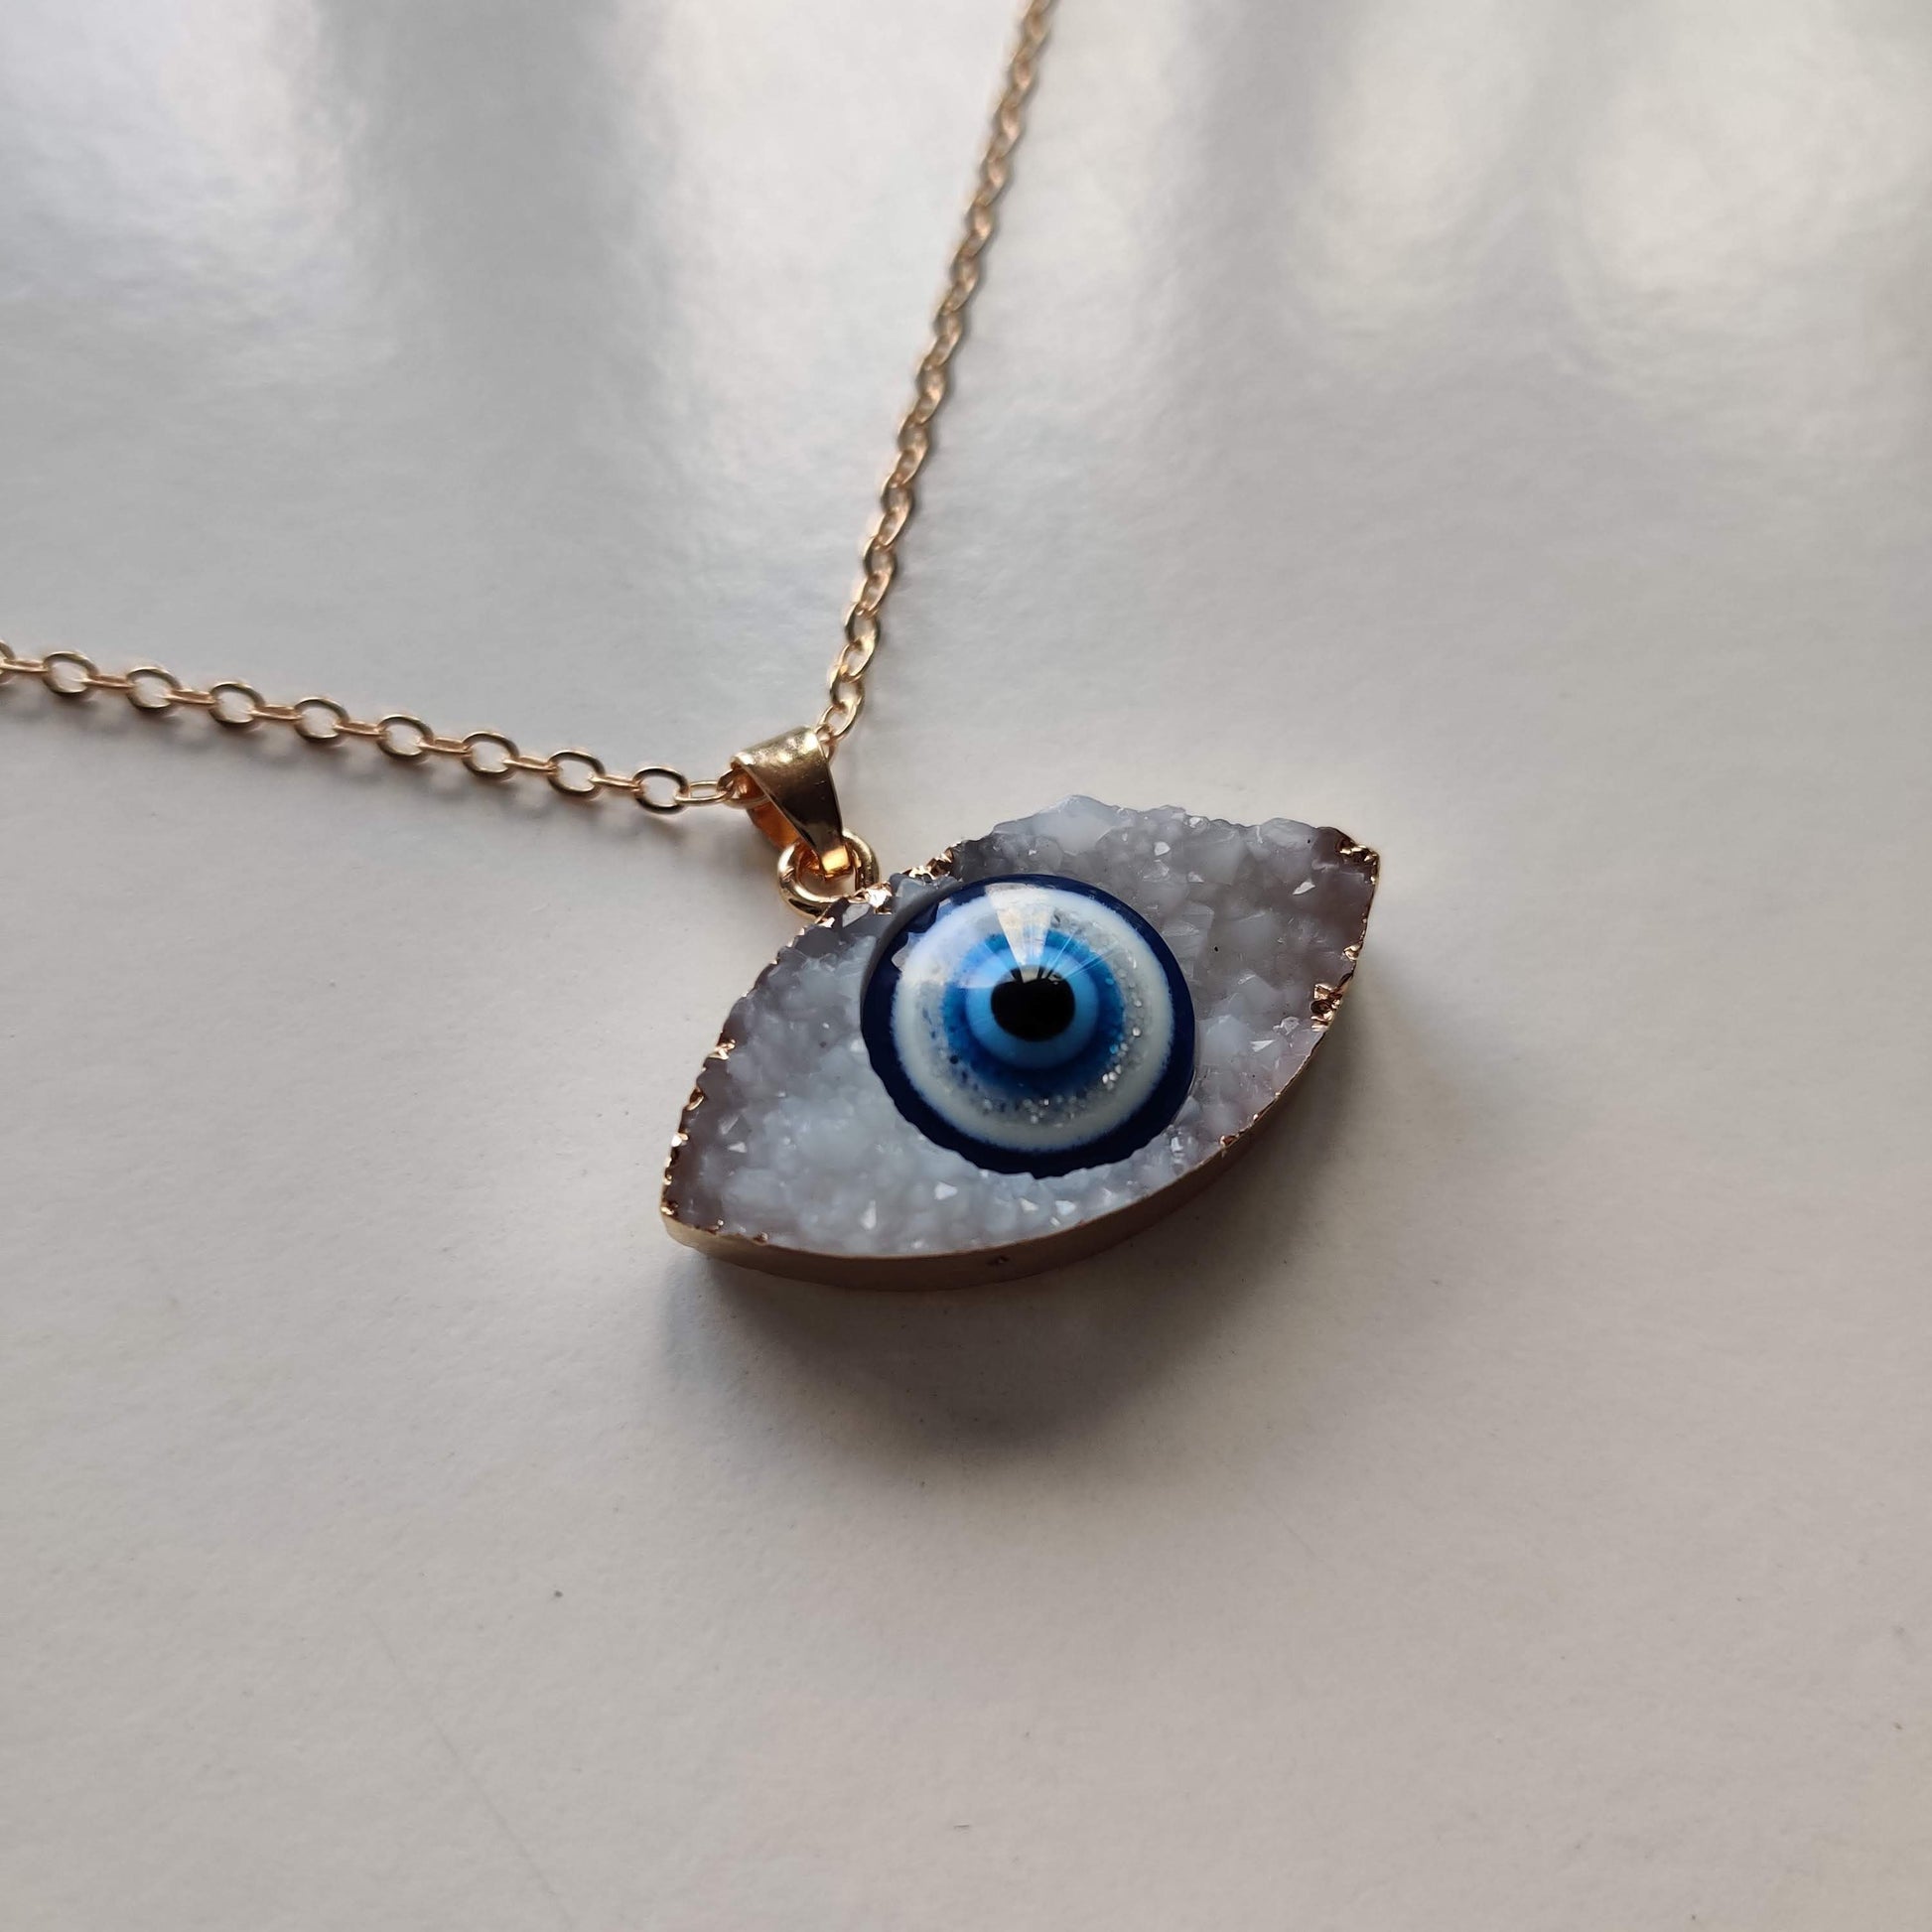 Evil Eye Crystal Druze Pendant with Gold Chain - Rivendell Shop